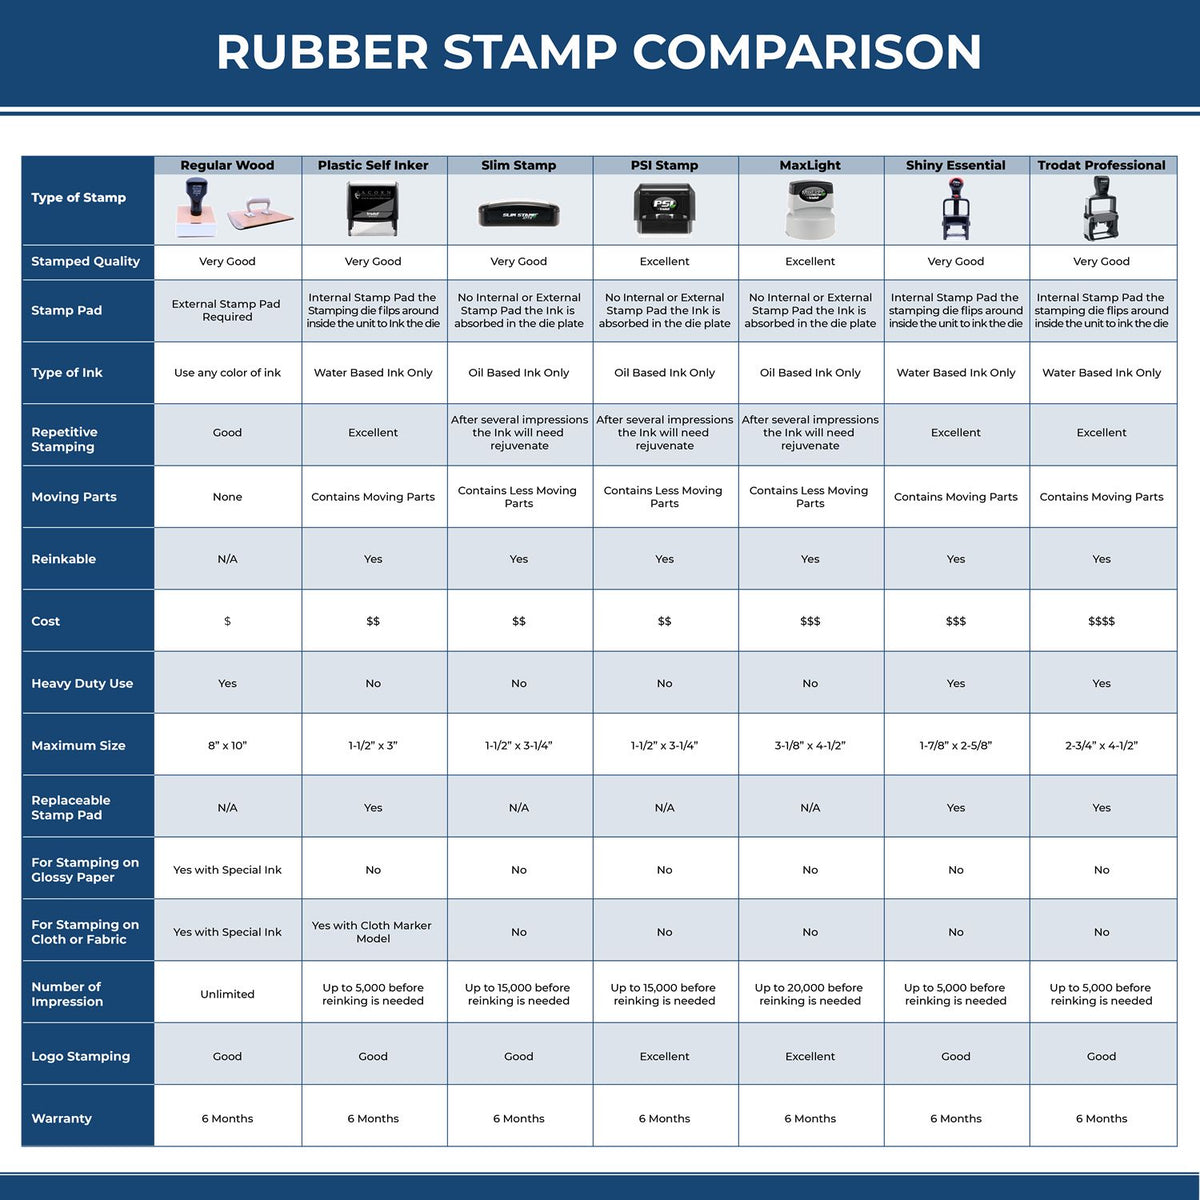 Large Self Inking Past Due Stamp 4141S Rubber Stamp Comparison